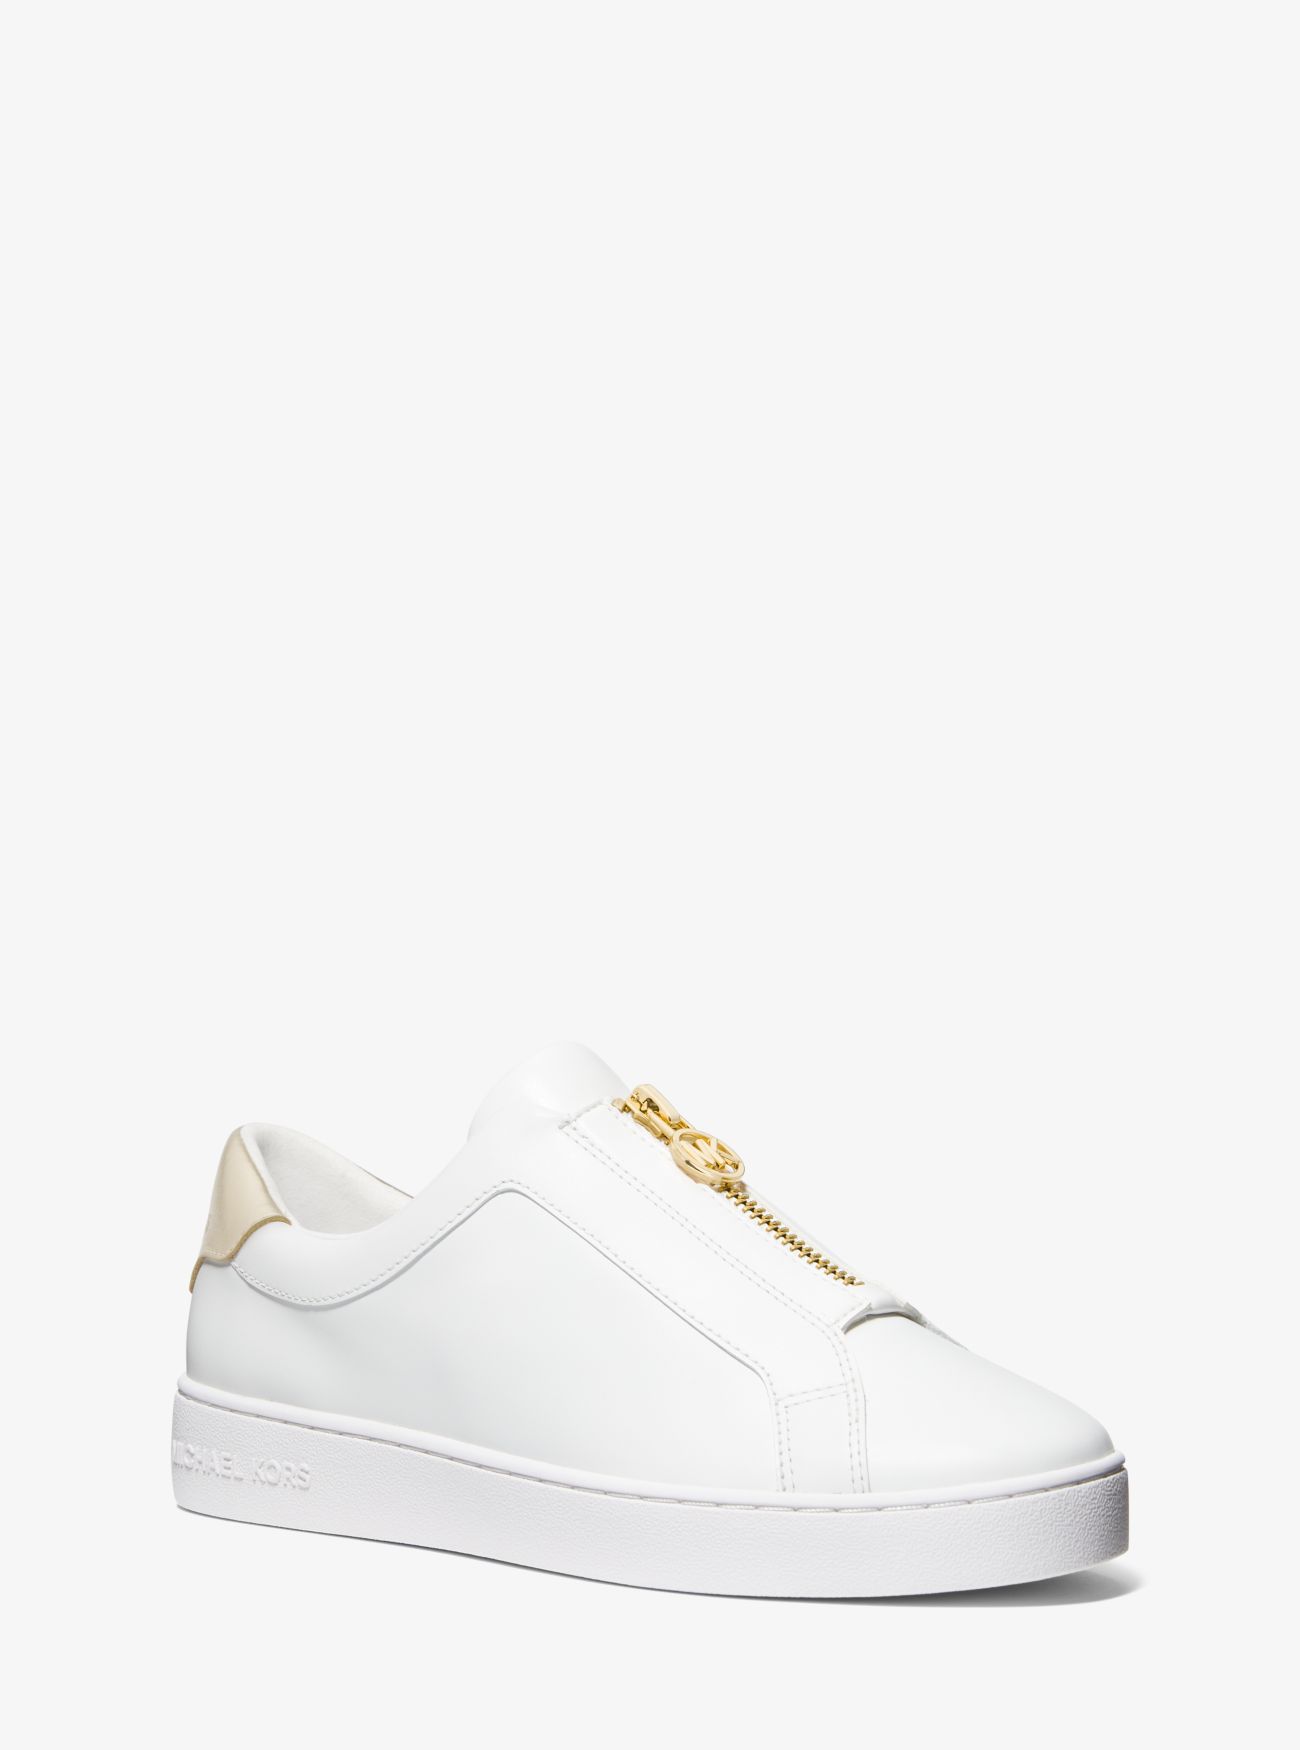 MK Keaton Leather Zip-Up Trainers - Gold - Michael Kors